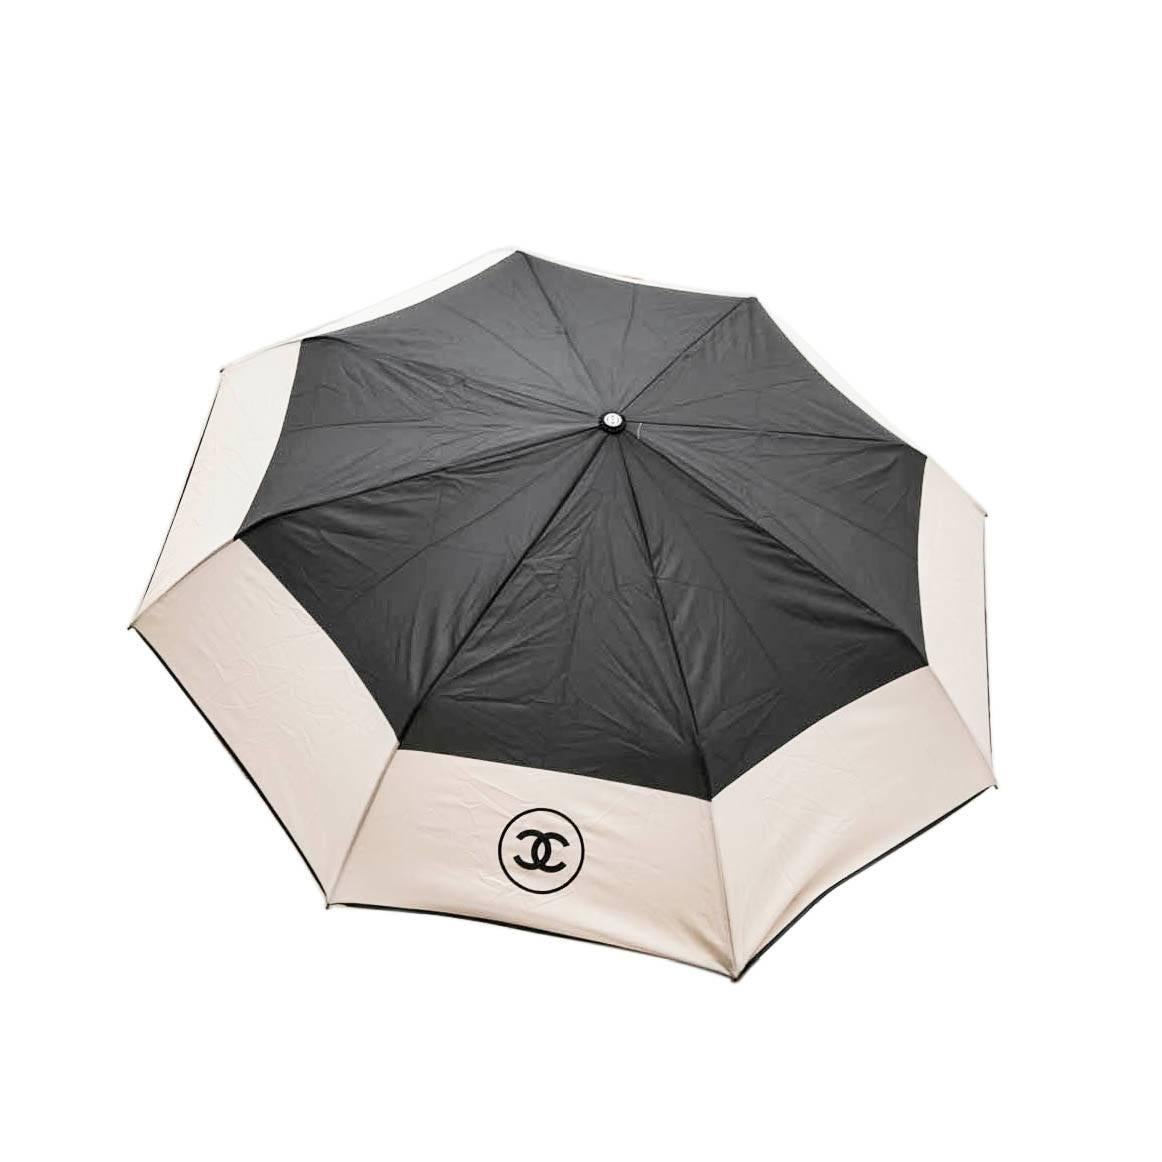 CHANEL Umbrella with CC logo in Beige and Black Fabric